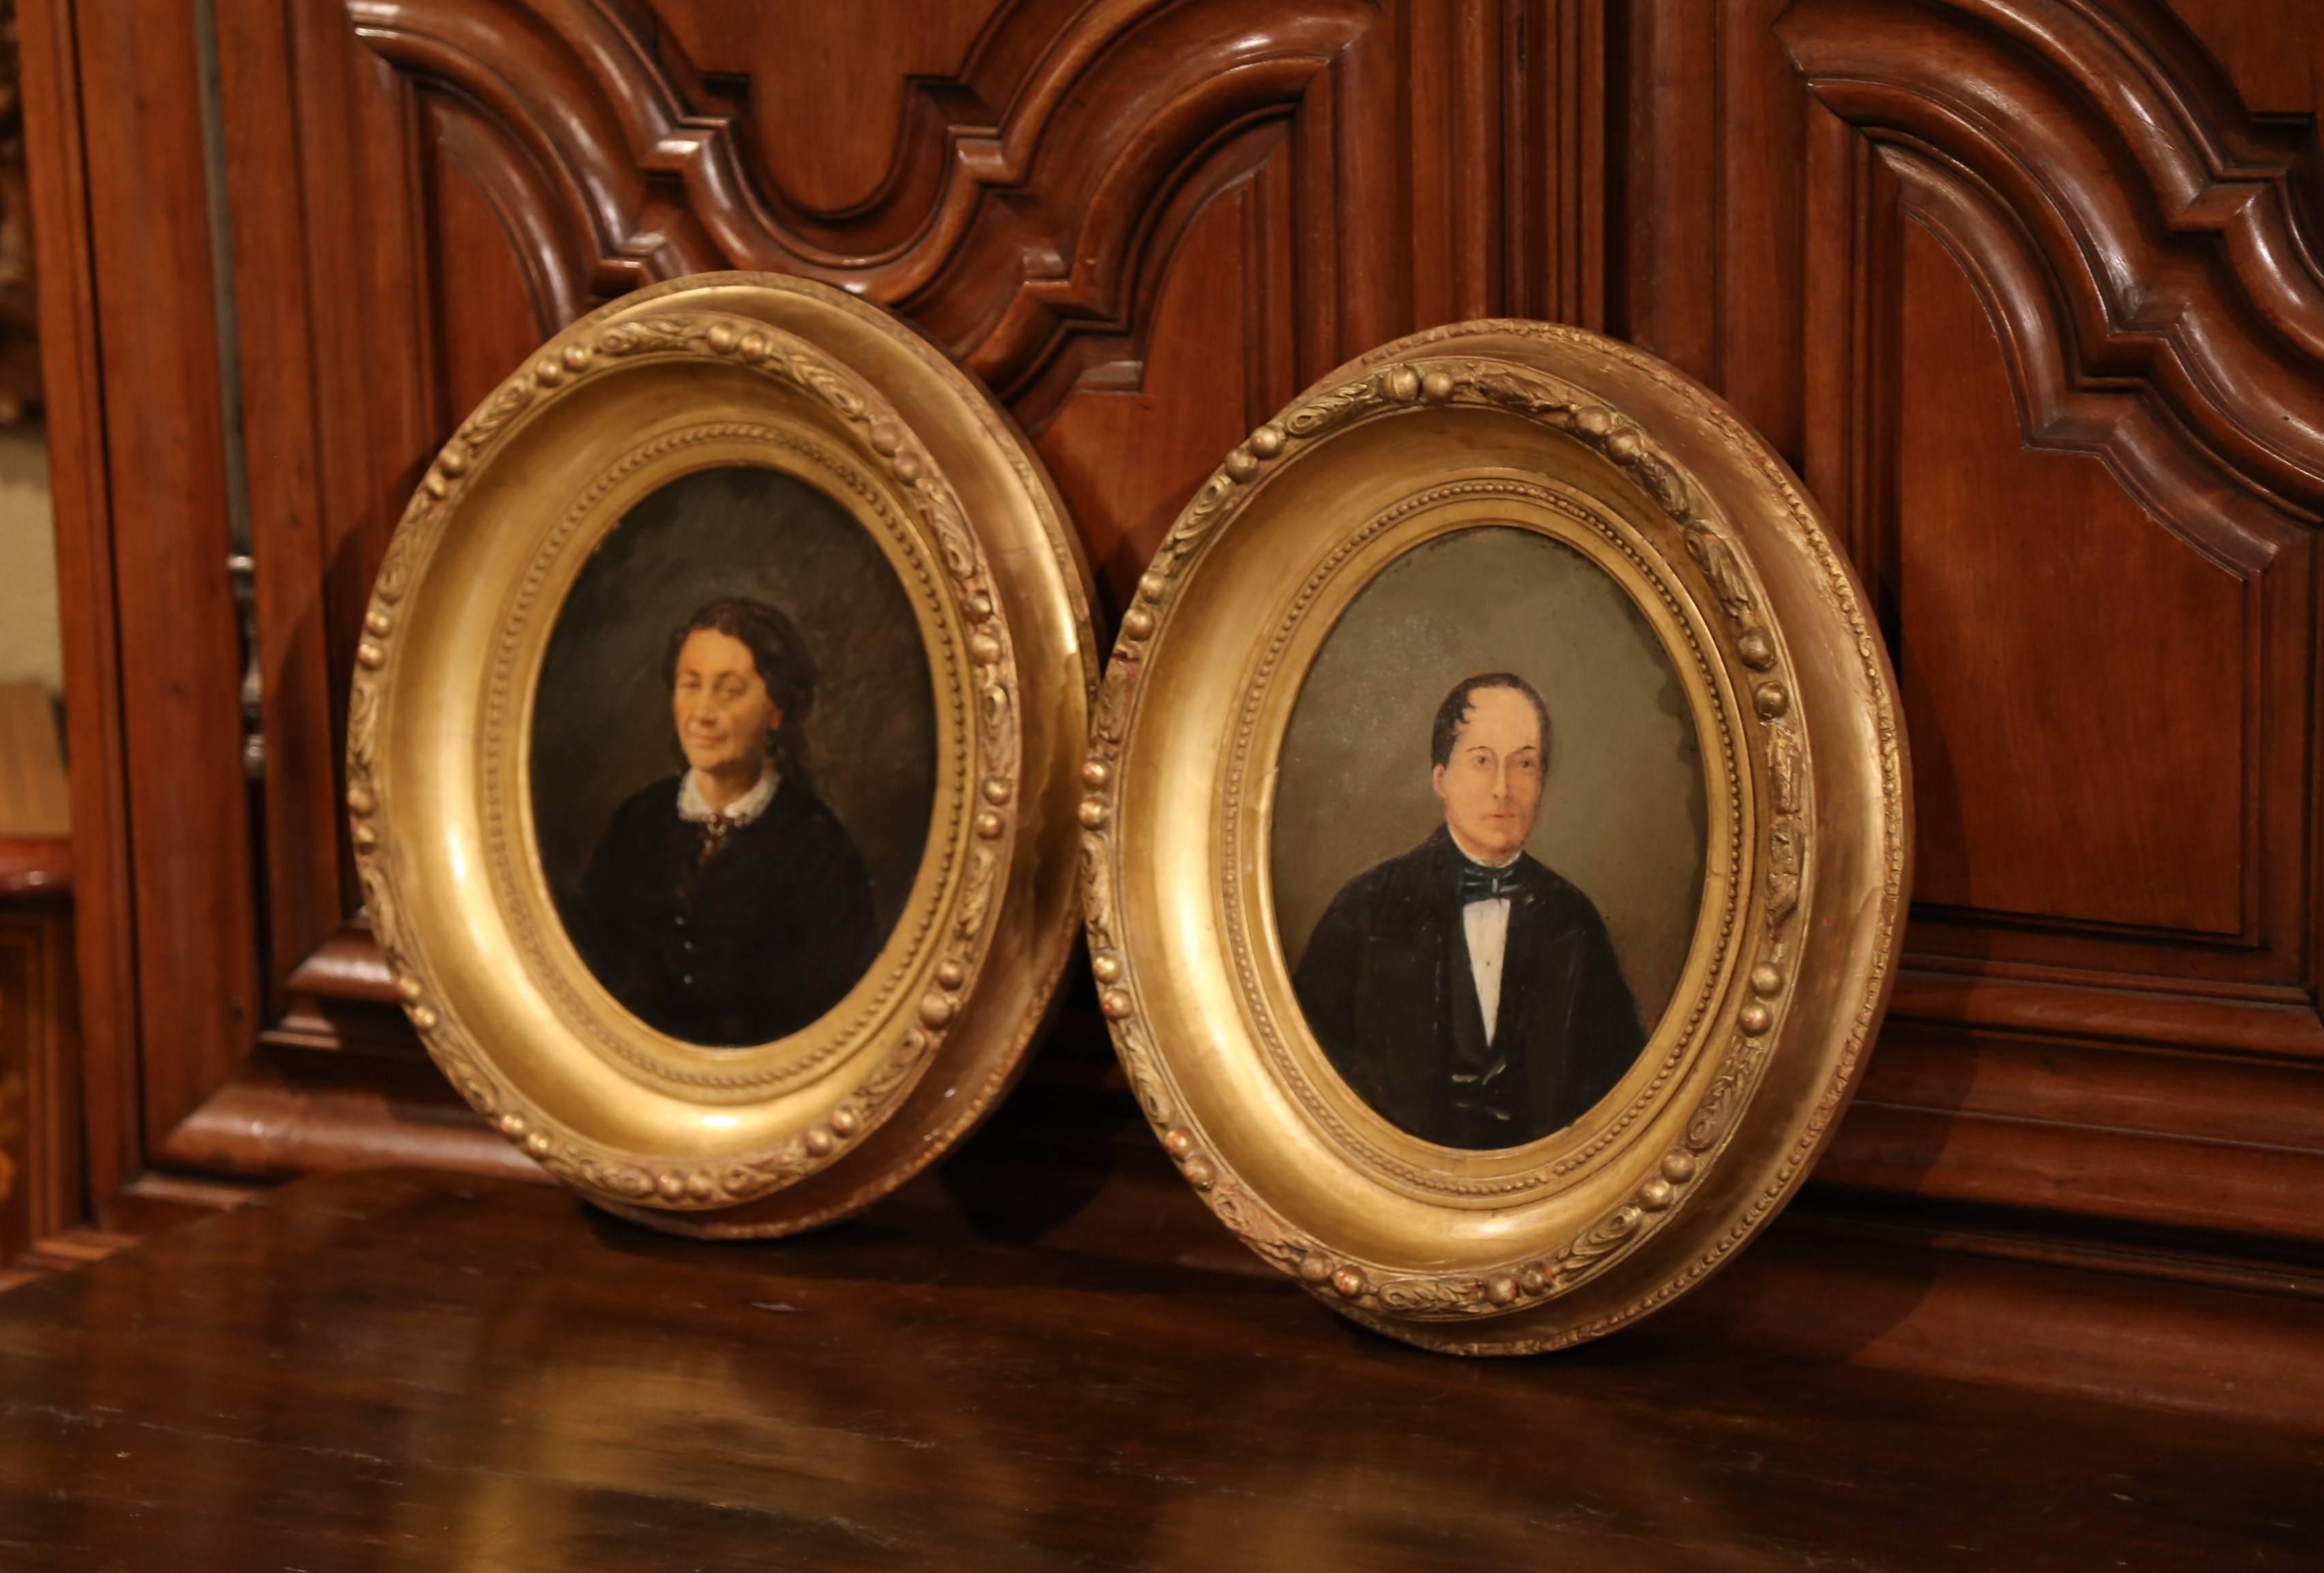 This fine pair of antique portraits were painted in France in the 19th century. The oval paintings feature portraits of a man and a woman dressed in traditional clothing and painted on a board. They are both set inside their original carved oval